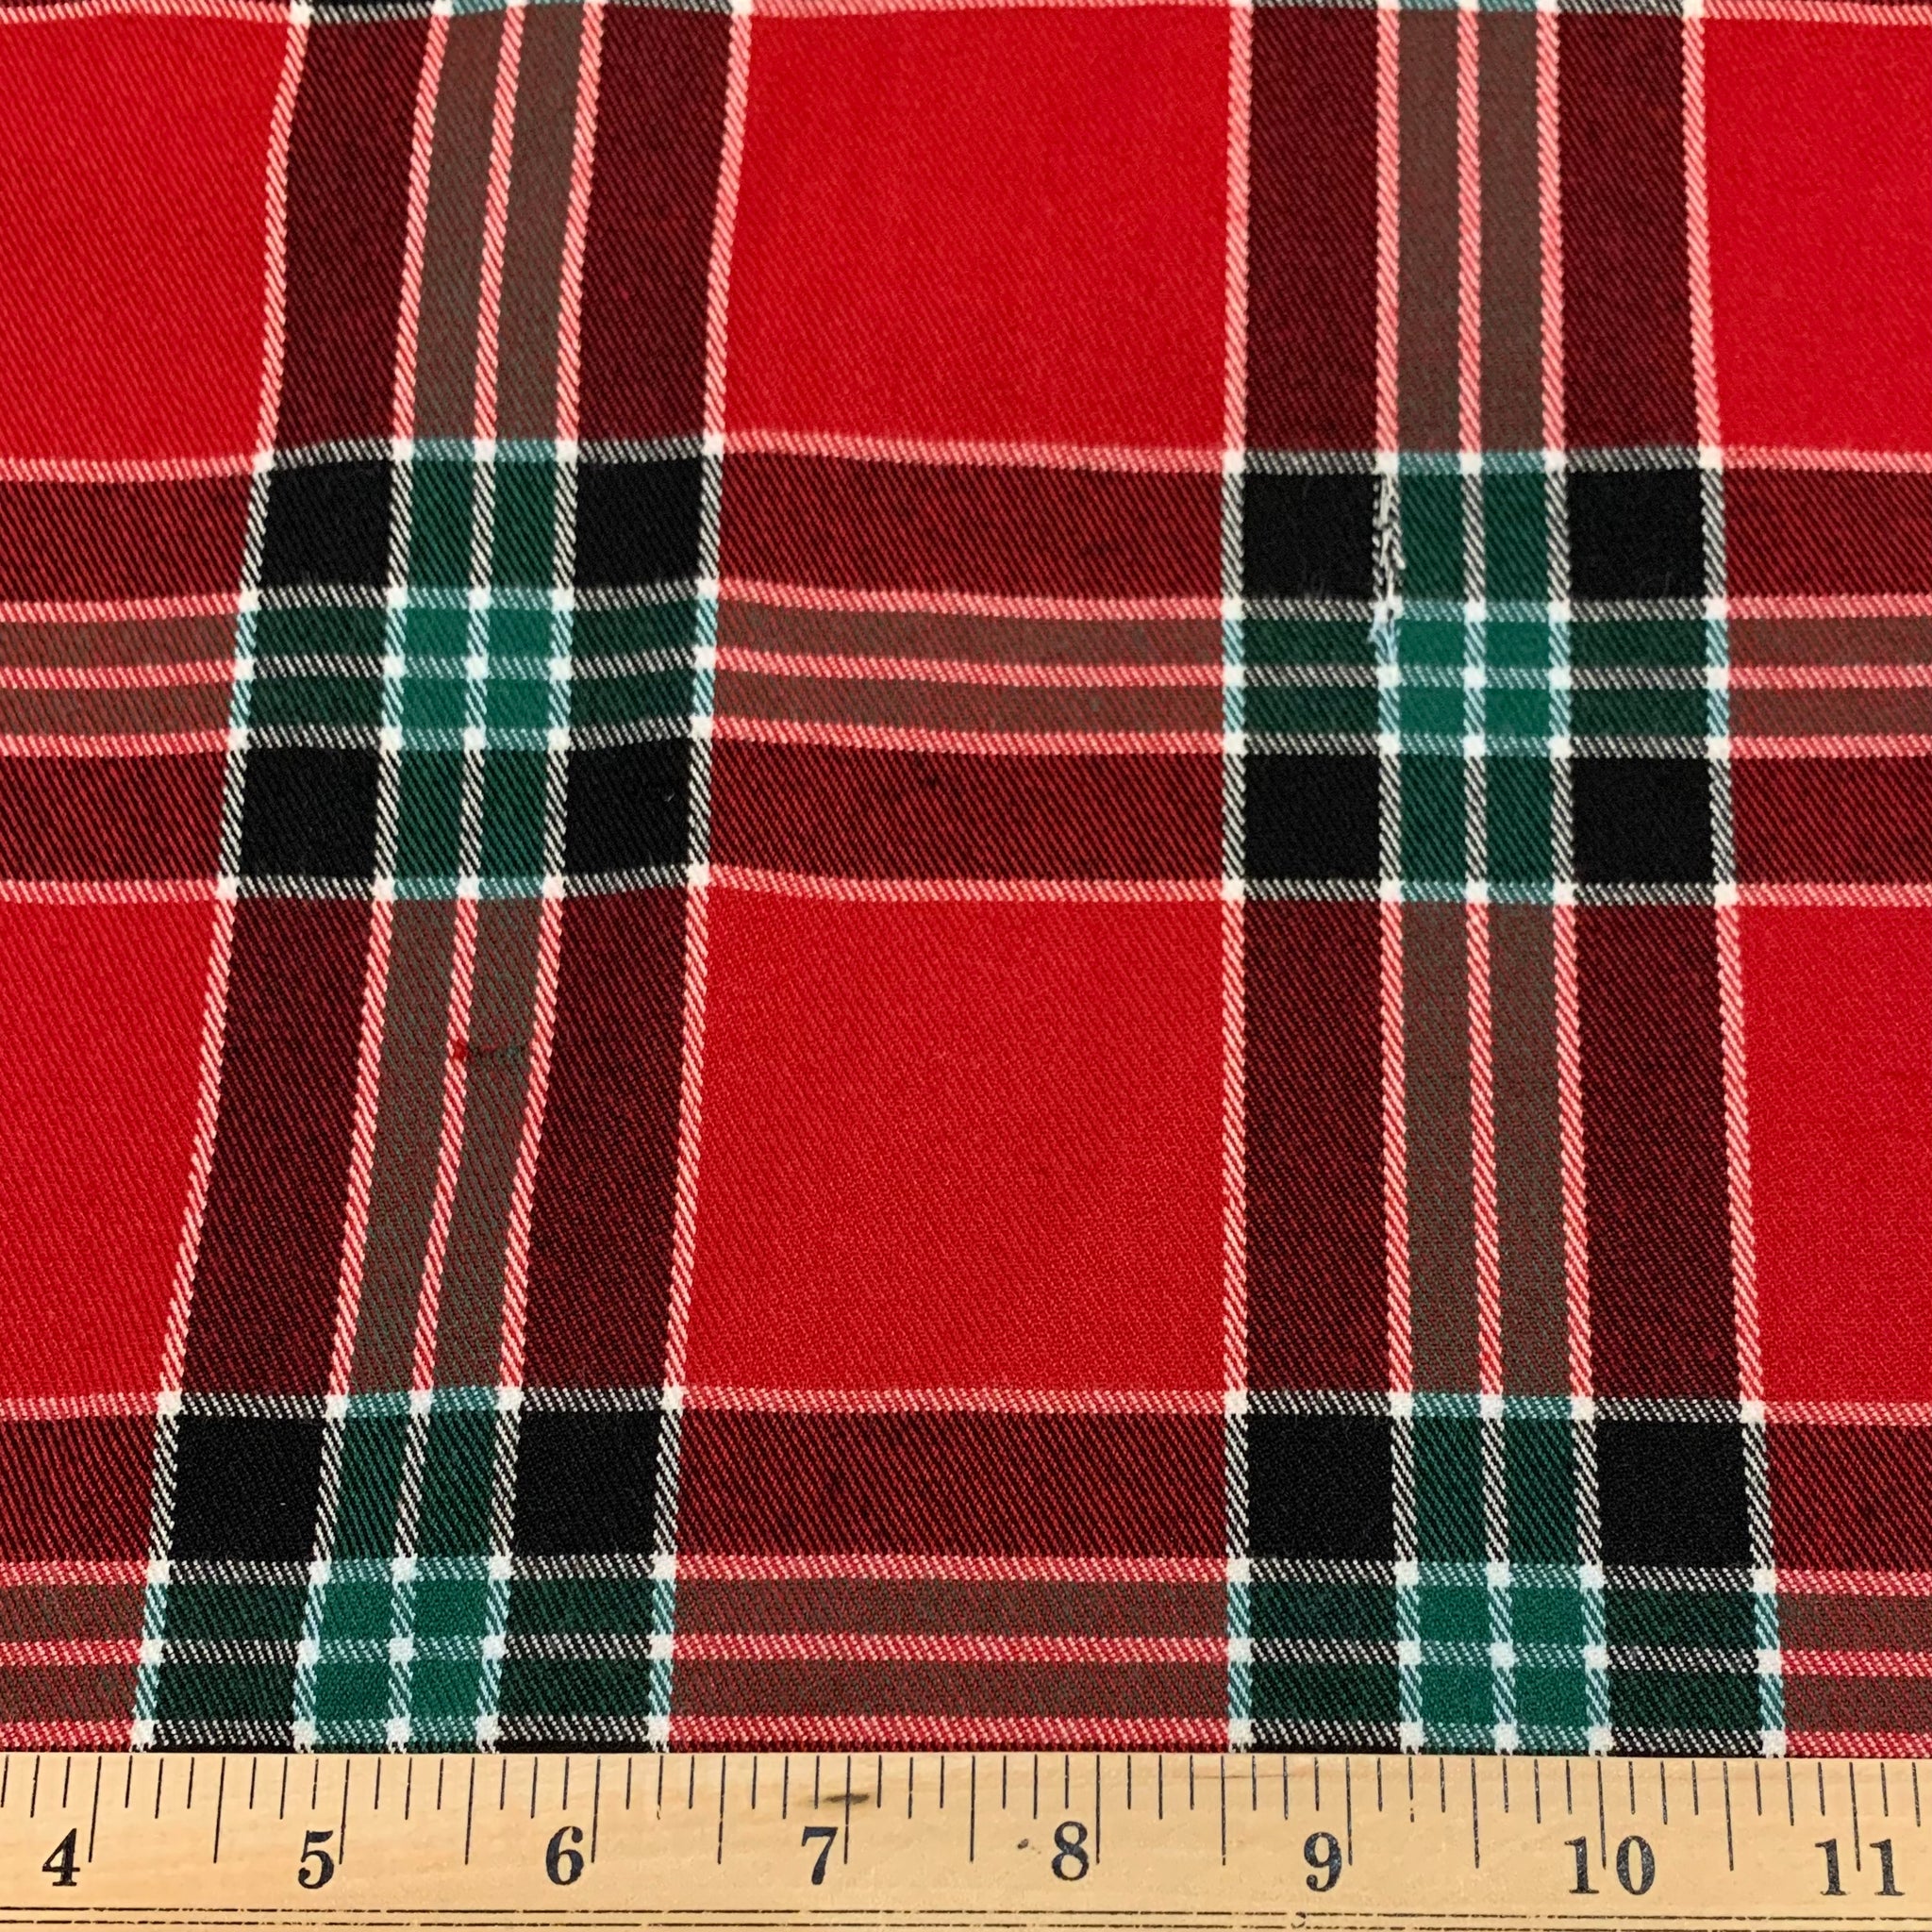 Yarn Dyed Plaid Cotton Flannel Fabric - Red Green Black